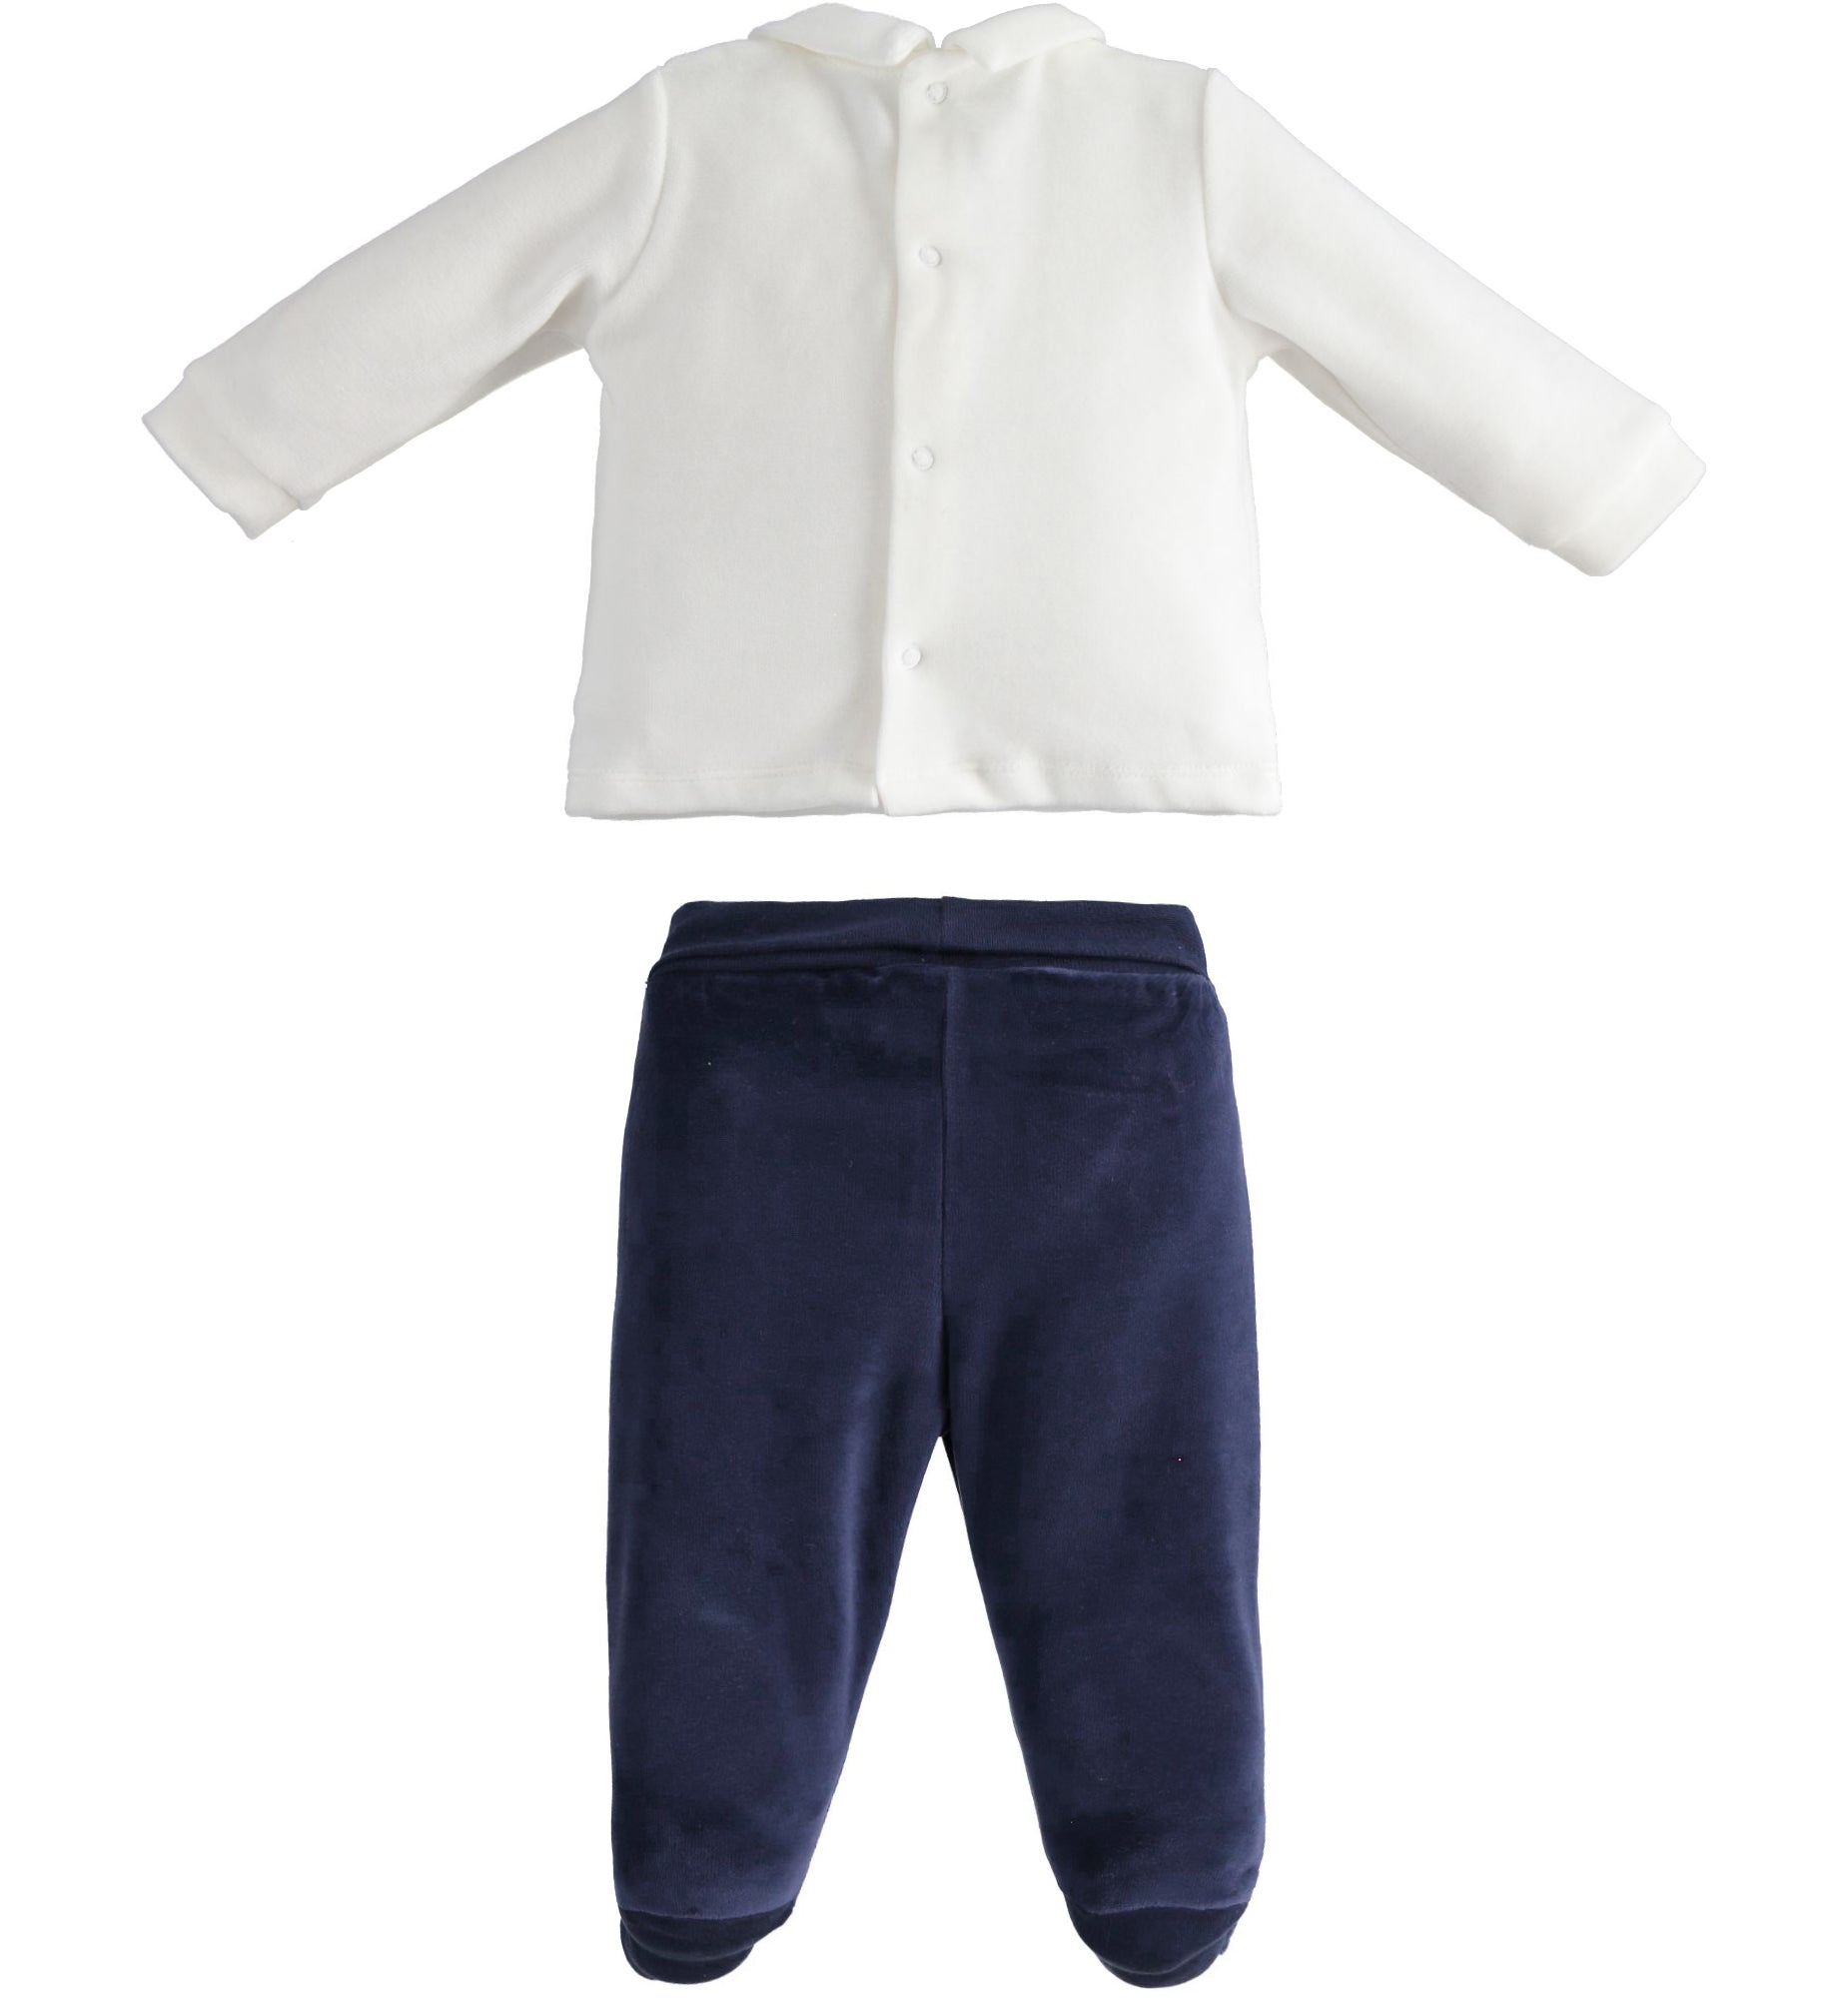 pure baby two piece velour footed pants and top by minibanda with car embroidery 